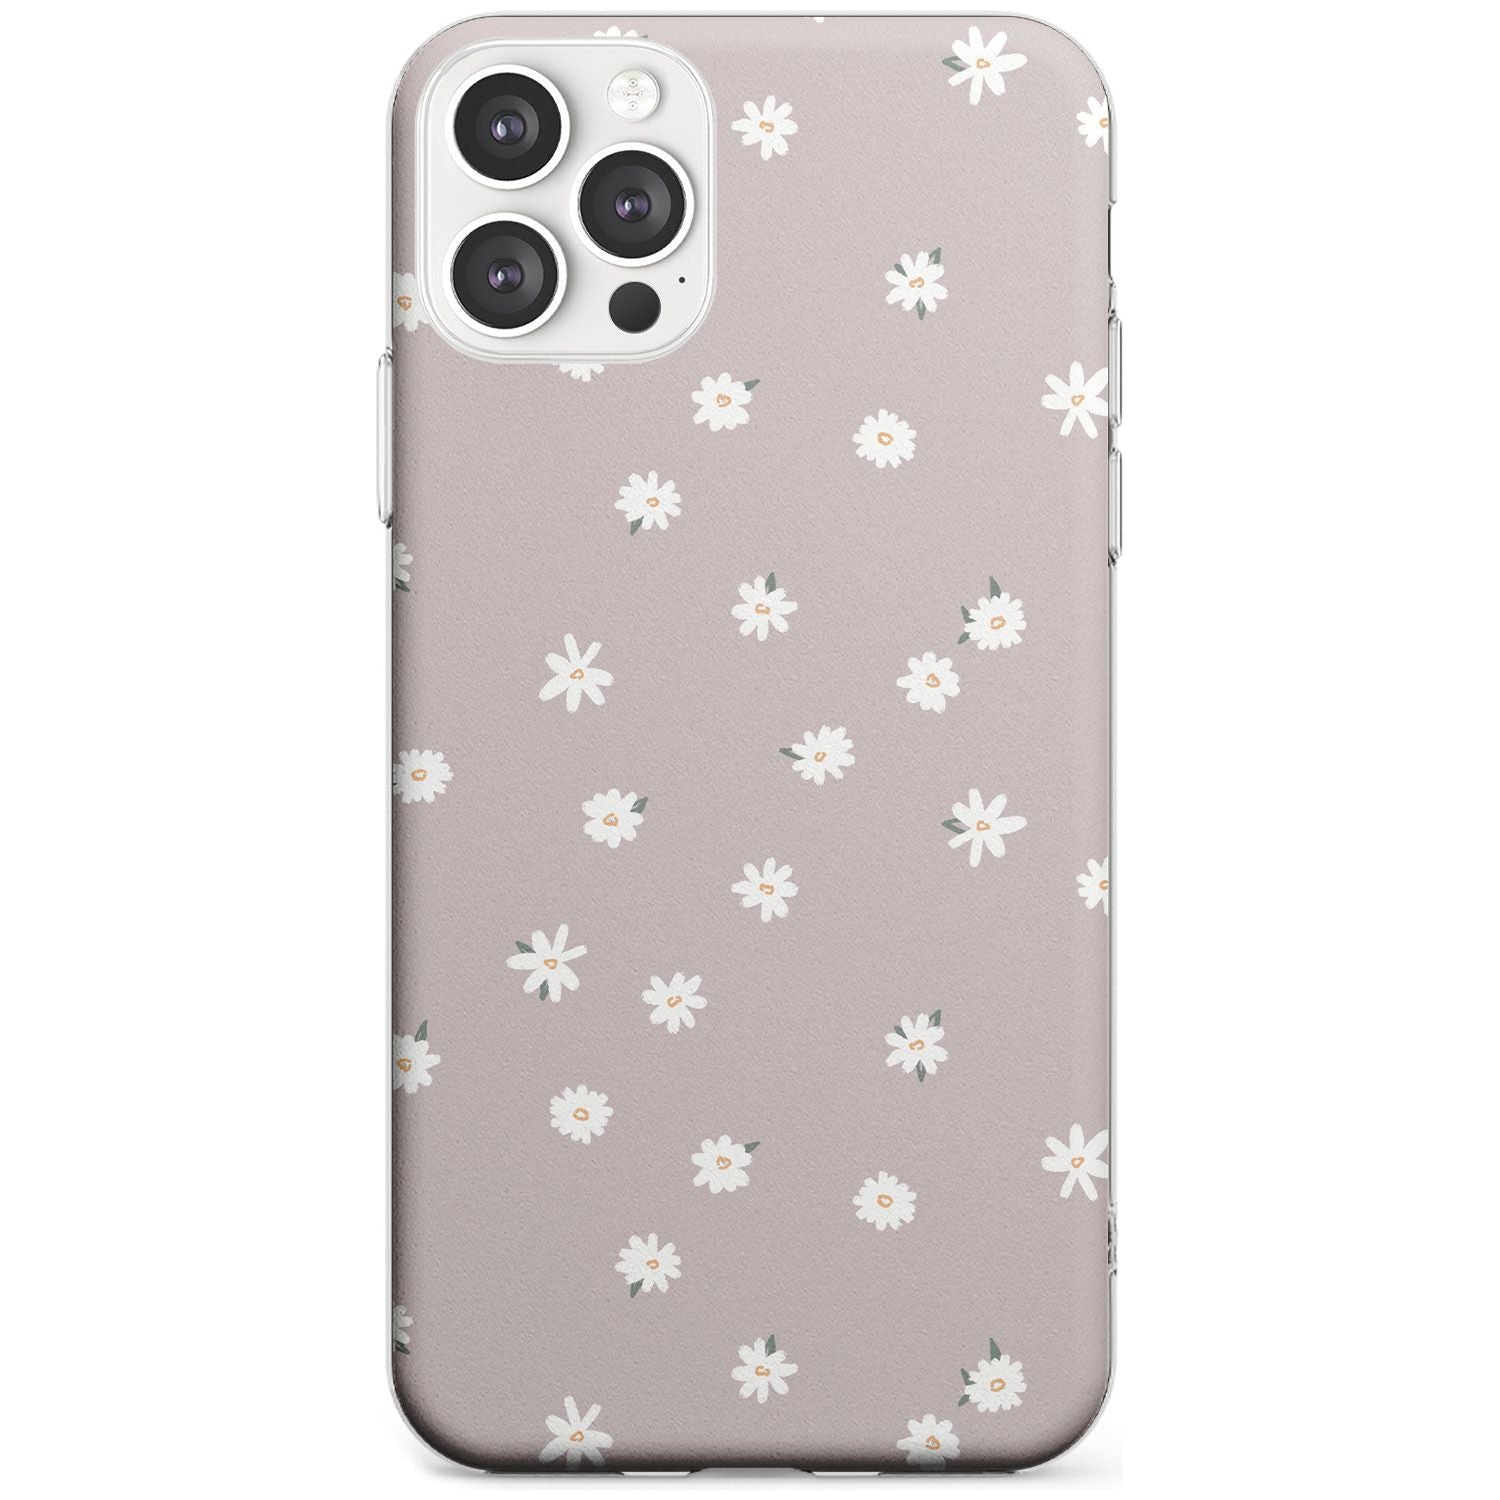 Painted Daises - Dark Pink Cute Floral Design Black Impact Phone Case for iPhone 11 Pro Max